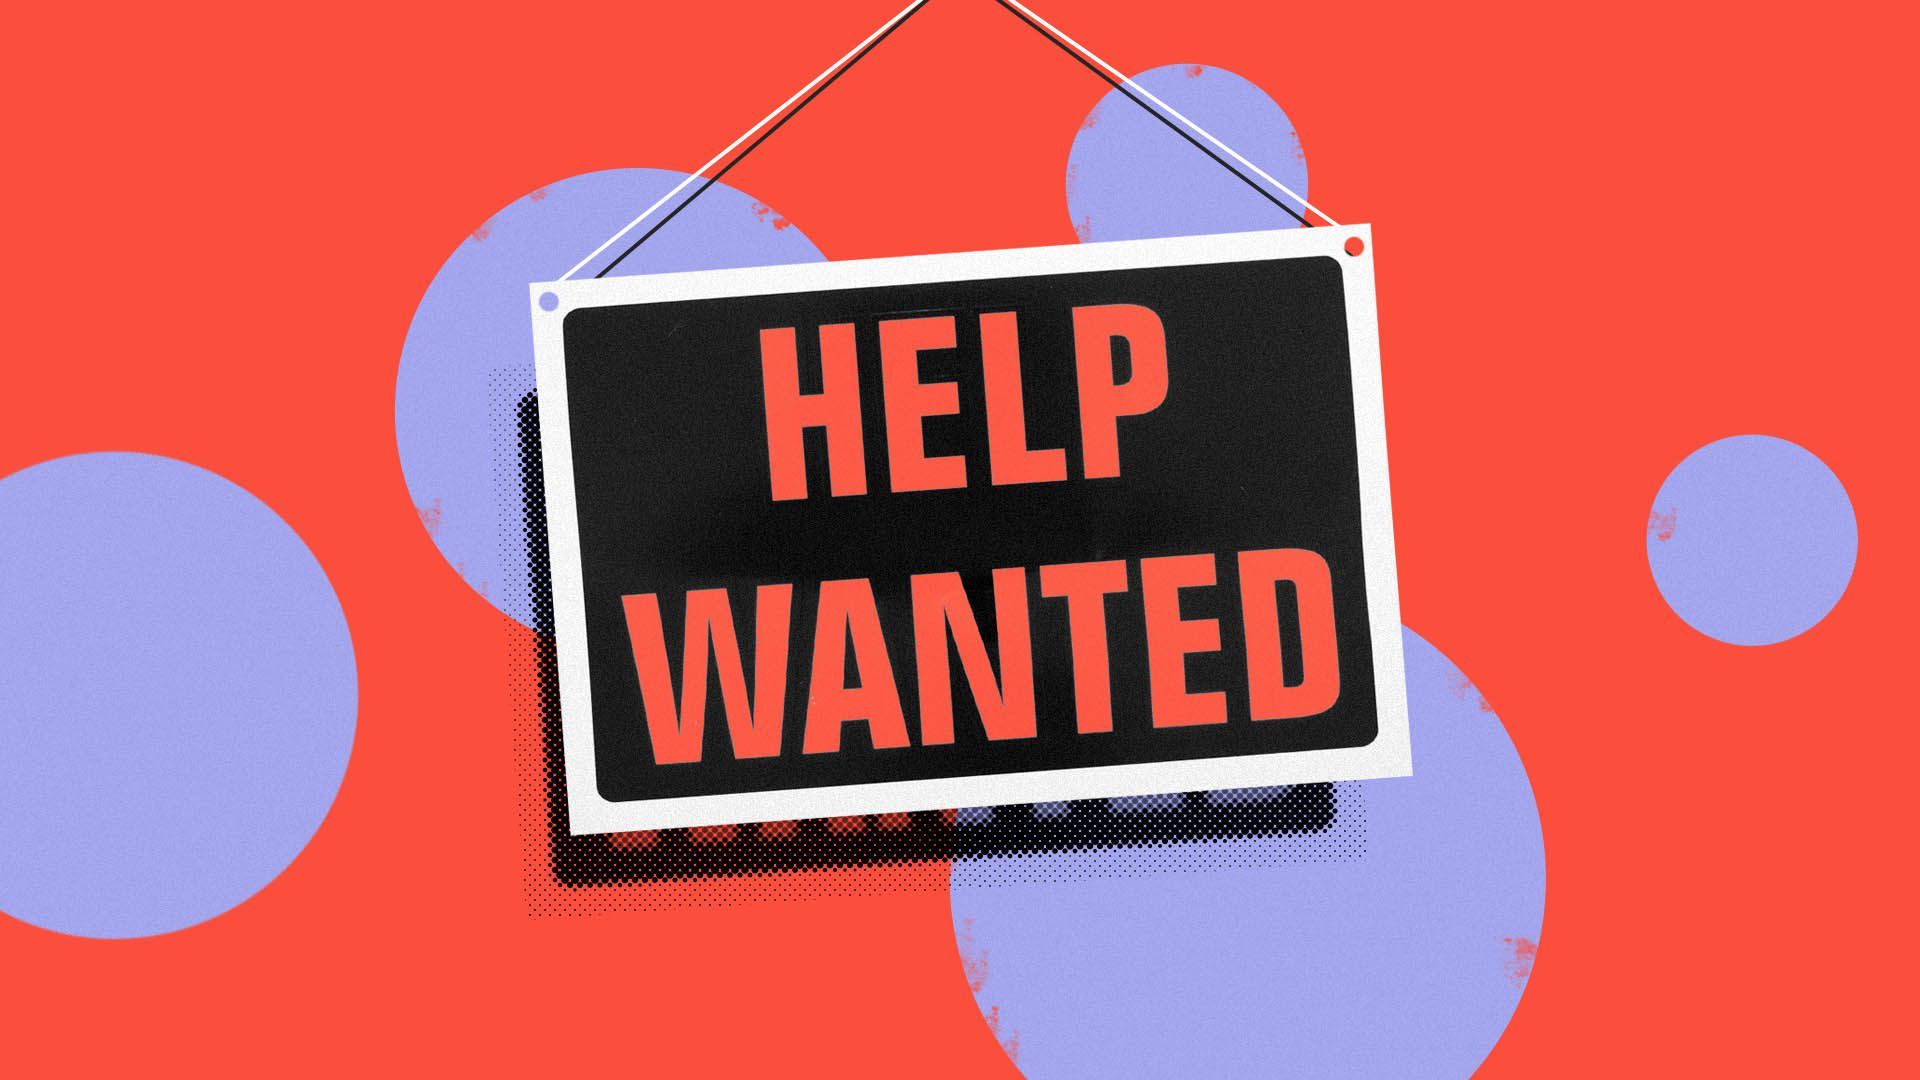 Illustration of a help wanted sign surrounded by circles